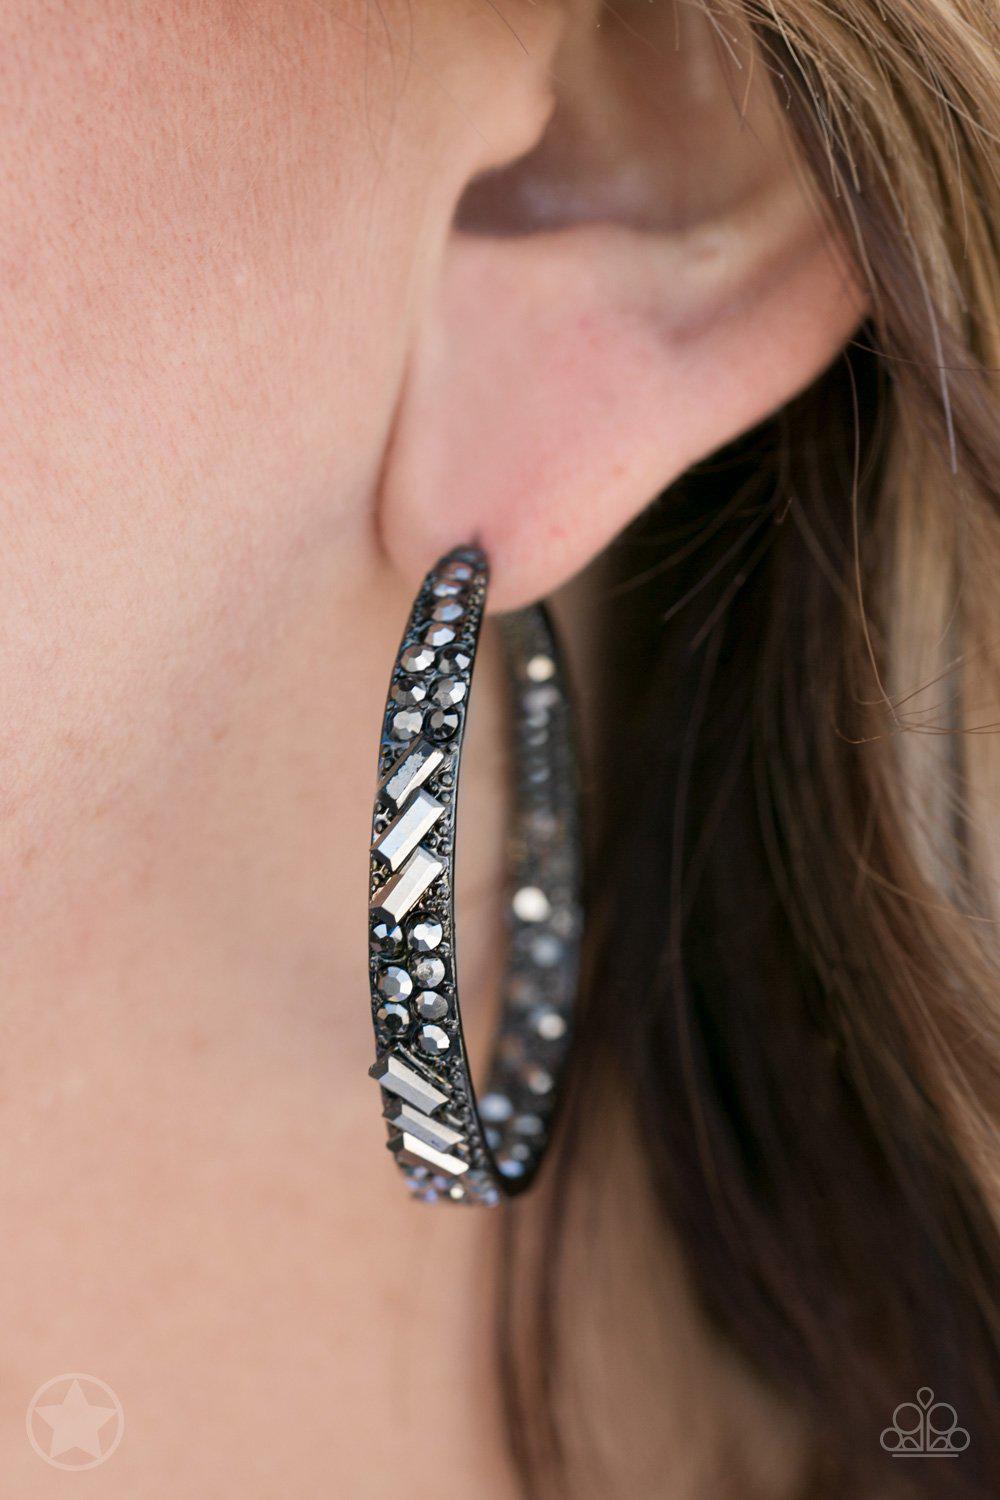 Glitzy By Association Gunmetal Black and Hematite Hoop Earrings - Paparazzi Accessories - Blockbuster - best seller - CarasShop.com - $5 Jewelry by Cara Jewels